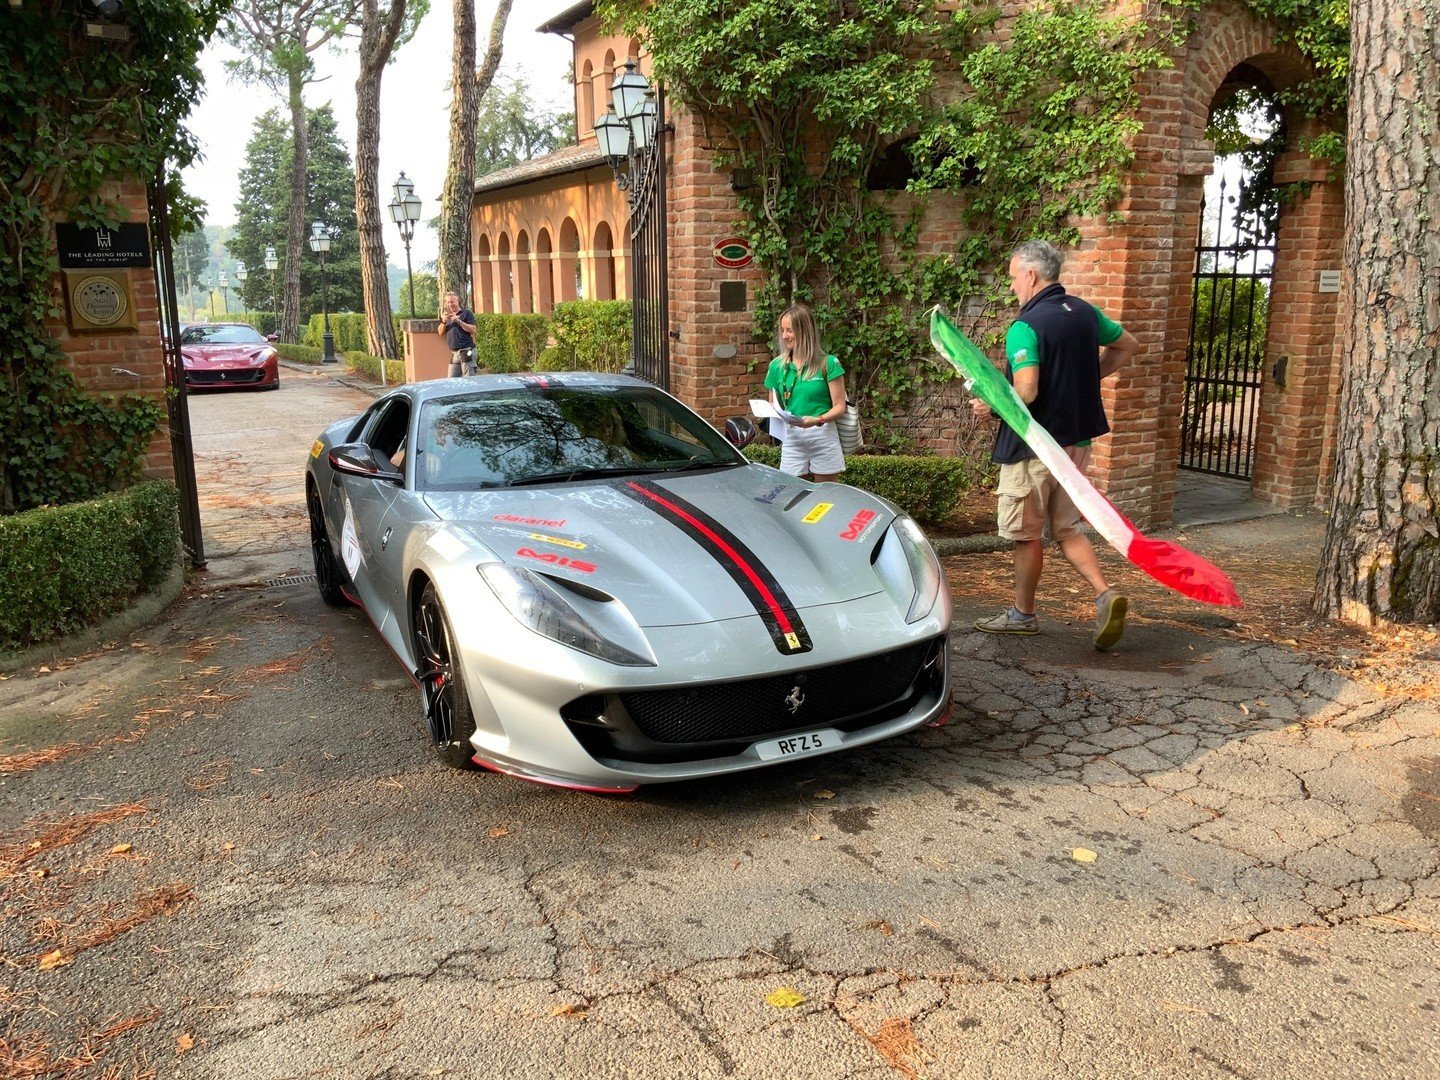 Our next event kicks off in June!⁠
⁠
Starting in Milano Marittima, Italy on the 8th of June 2024, the pre-planned route of the Giro d&rsquo;Italia will see you driving your supercar from luxury hotel to luxury hotel, typically driving around 200 mile